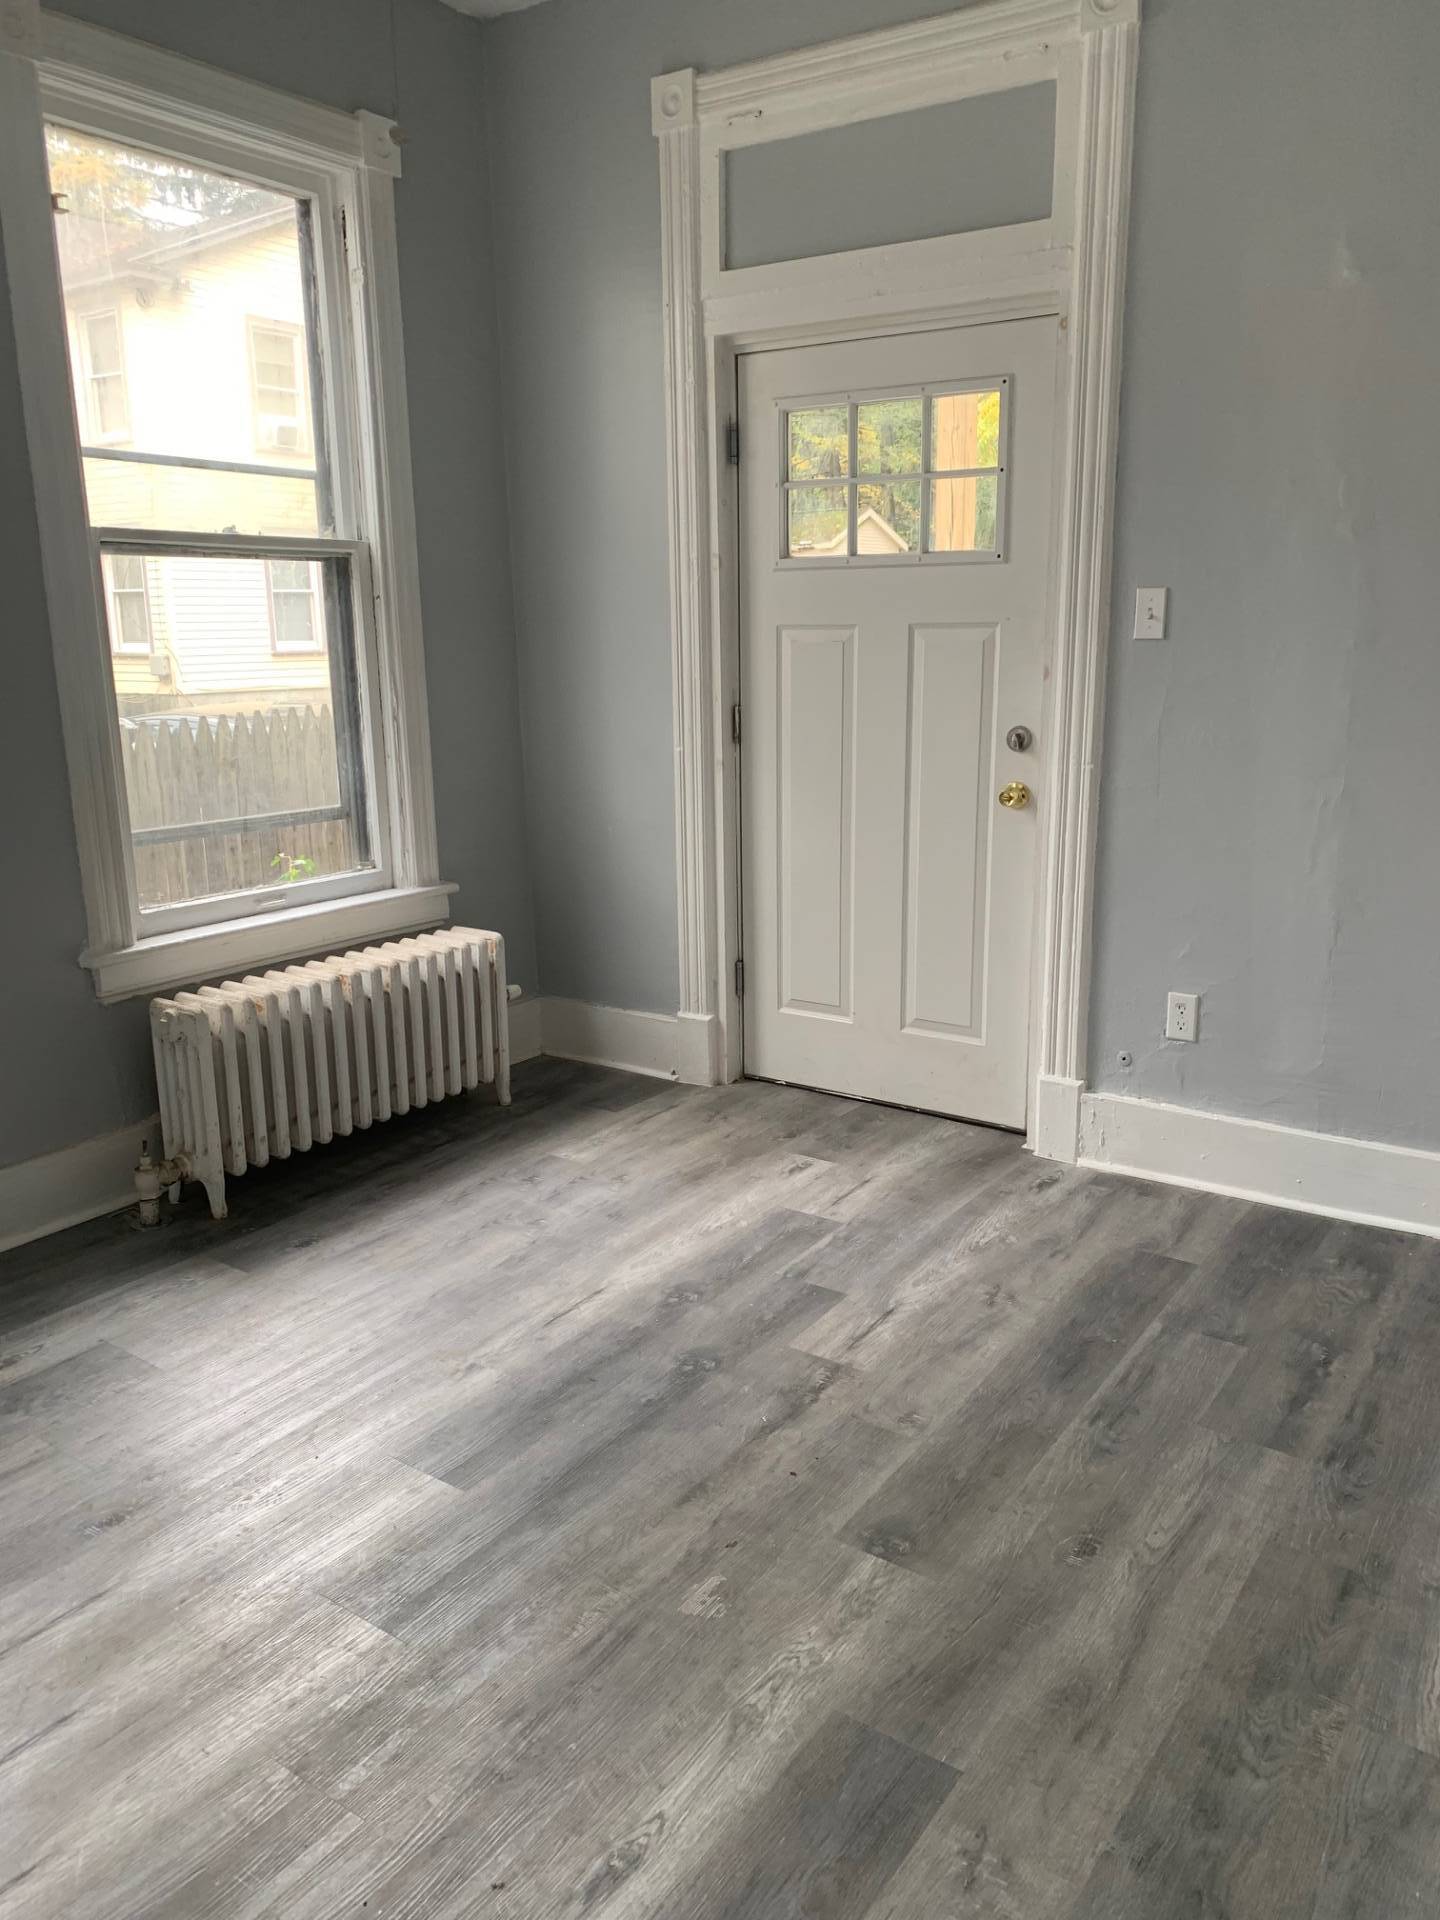 852 Union Street, Schenectady, 36093, New York 12308, 1 Bedroom Bedrooms, 2 Rooms Rooms,1 BathroomBathrooms,Residential Lease,For Rent,Union Street,11122856